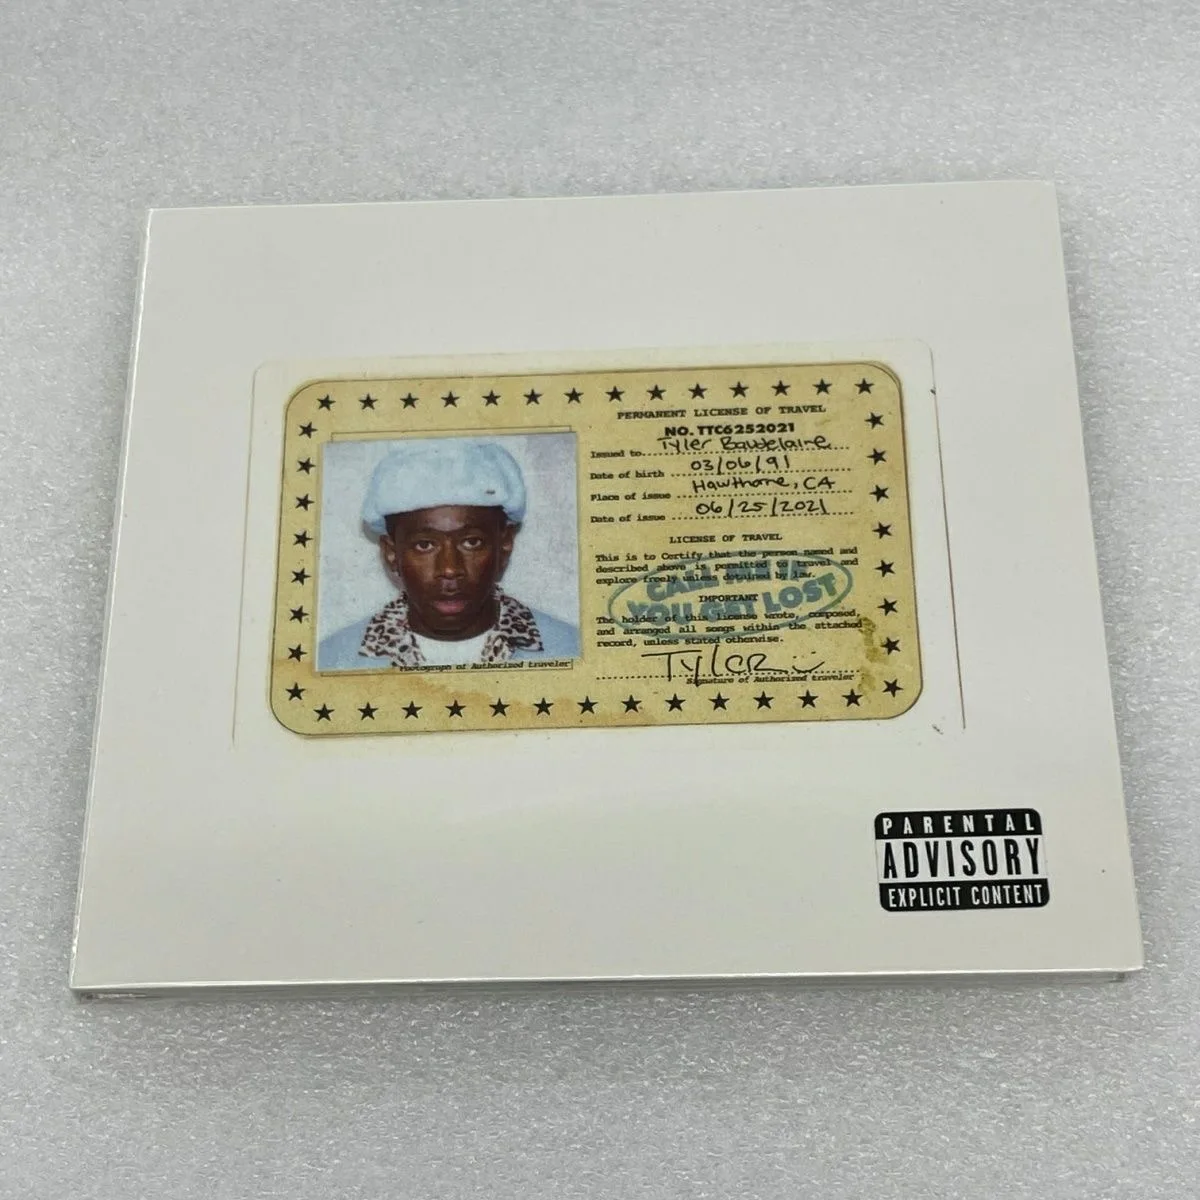 

Classic Rap Tyler The Creator Music CD CALL ME IF YOU GET LOST Album Music Record Cosplay Walkman Car Party Soundtracks Box Gift